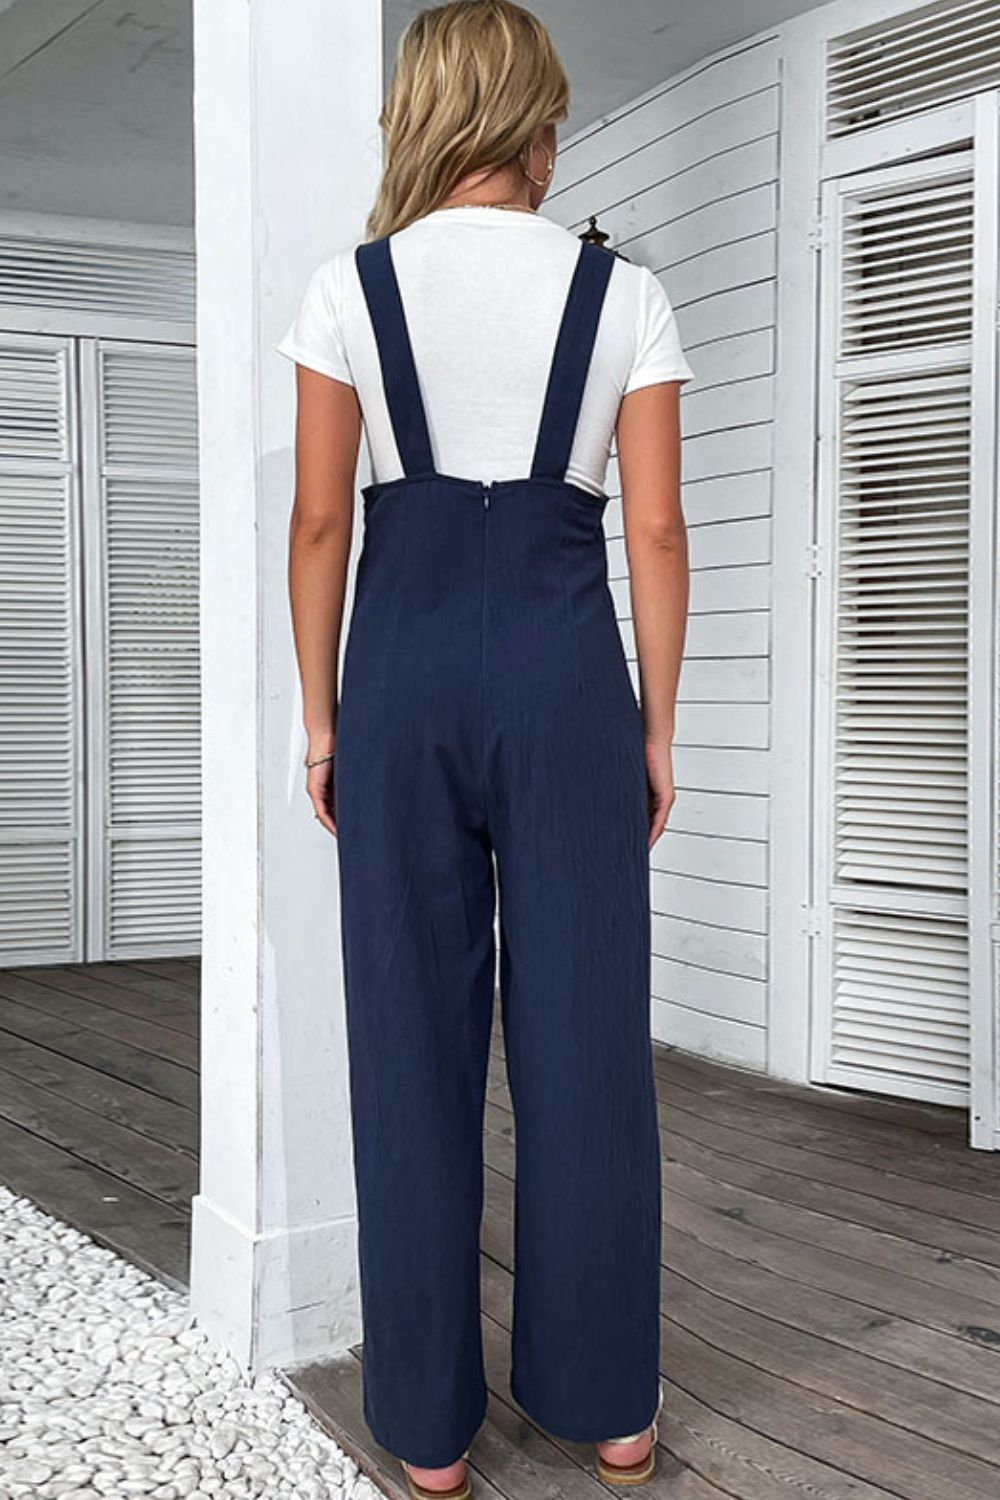 Light Up Your Life Buttoned Straight Leg Overalls - 2 colors